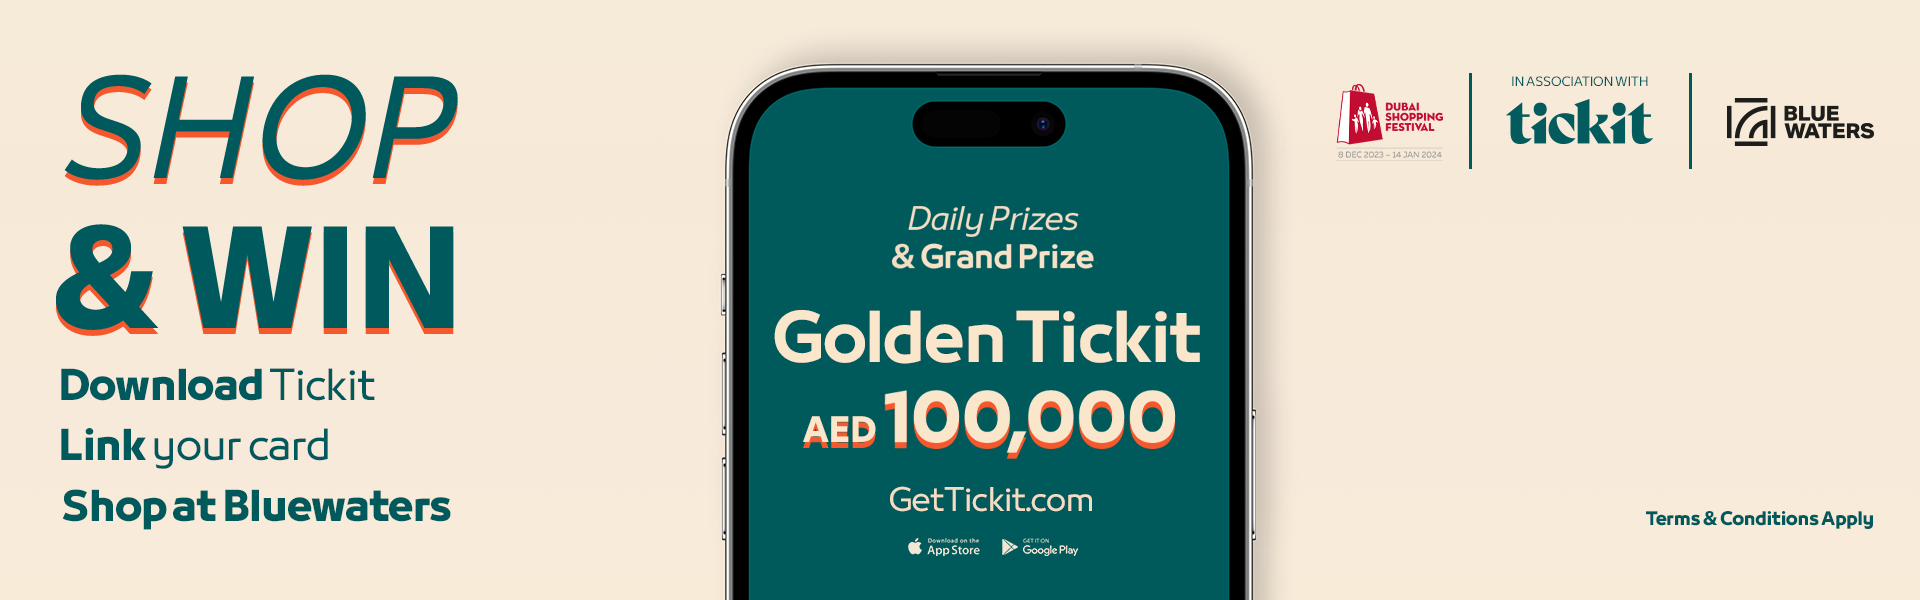 Ticket App & bluewaters